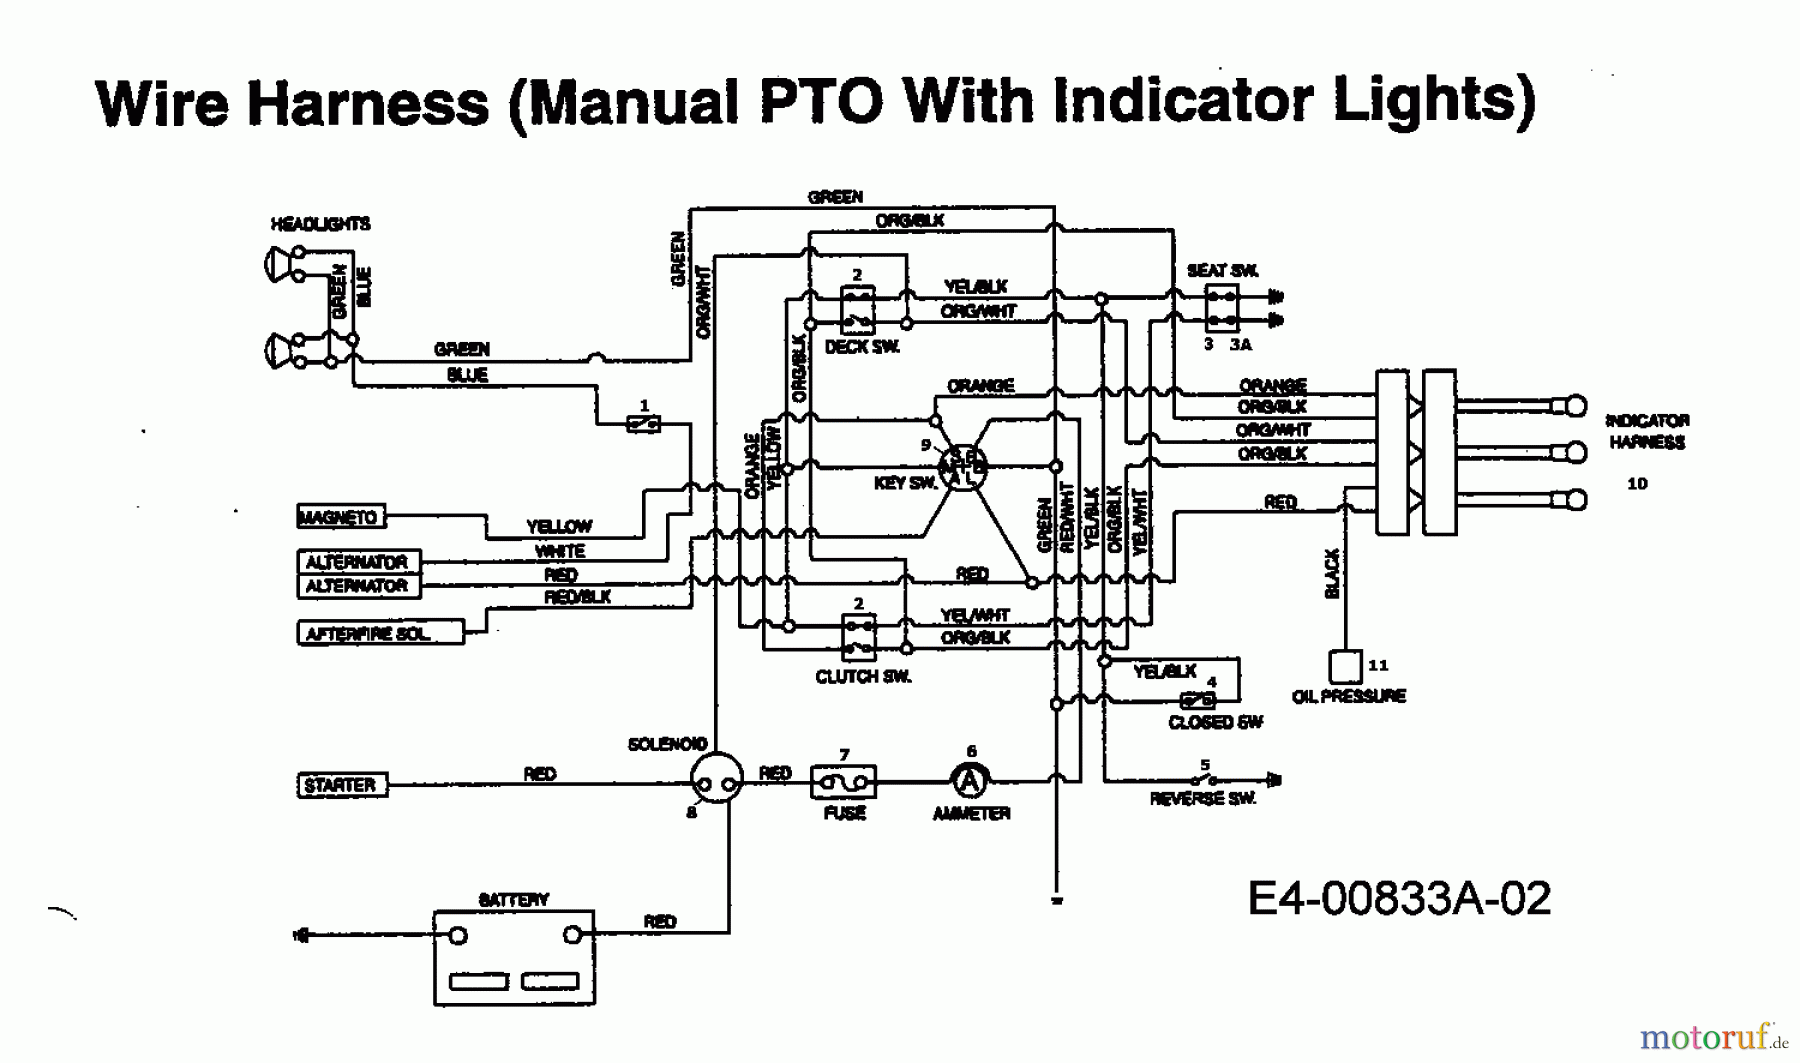  Gutbrod Lawn tractors Golden Sprint 2500 H 13AD79GN604  (1998) Wiring diagram with indicator lights